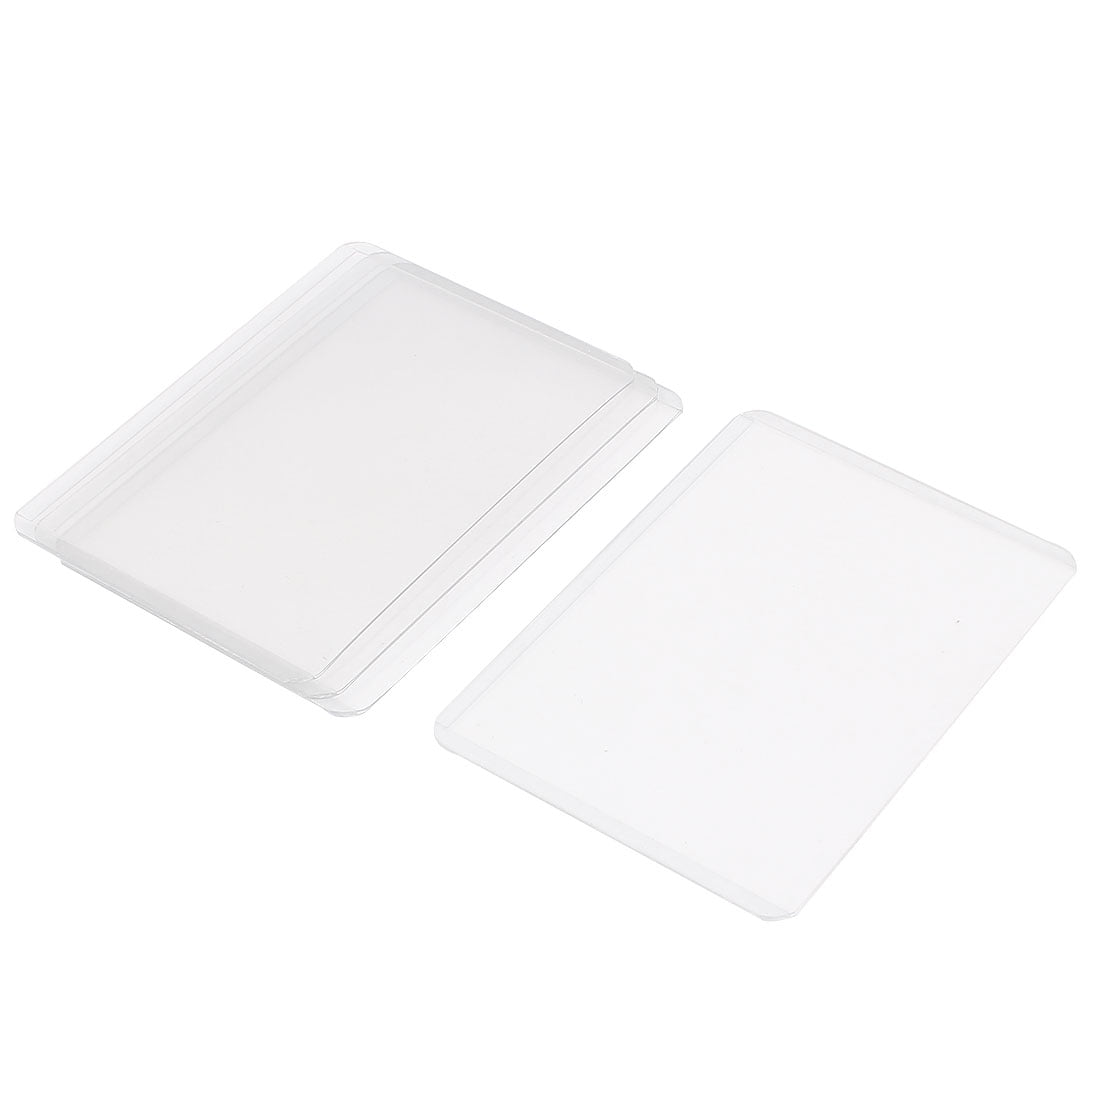 Credit Debit Card Clear Plastic Dust Cover Driving Licence Protector ID Sleeve